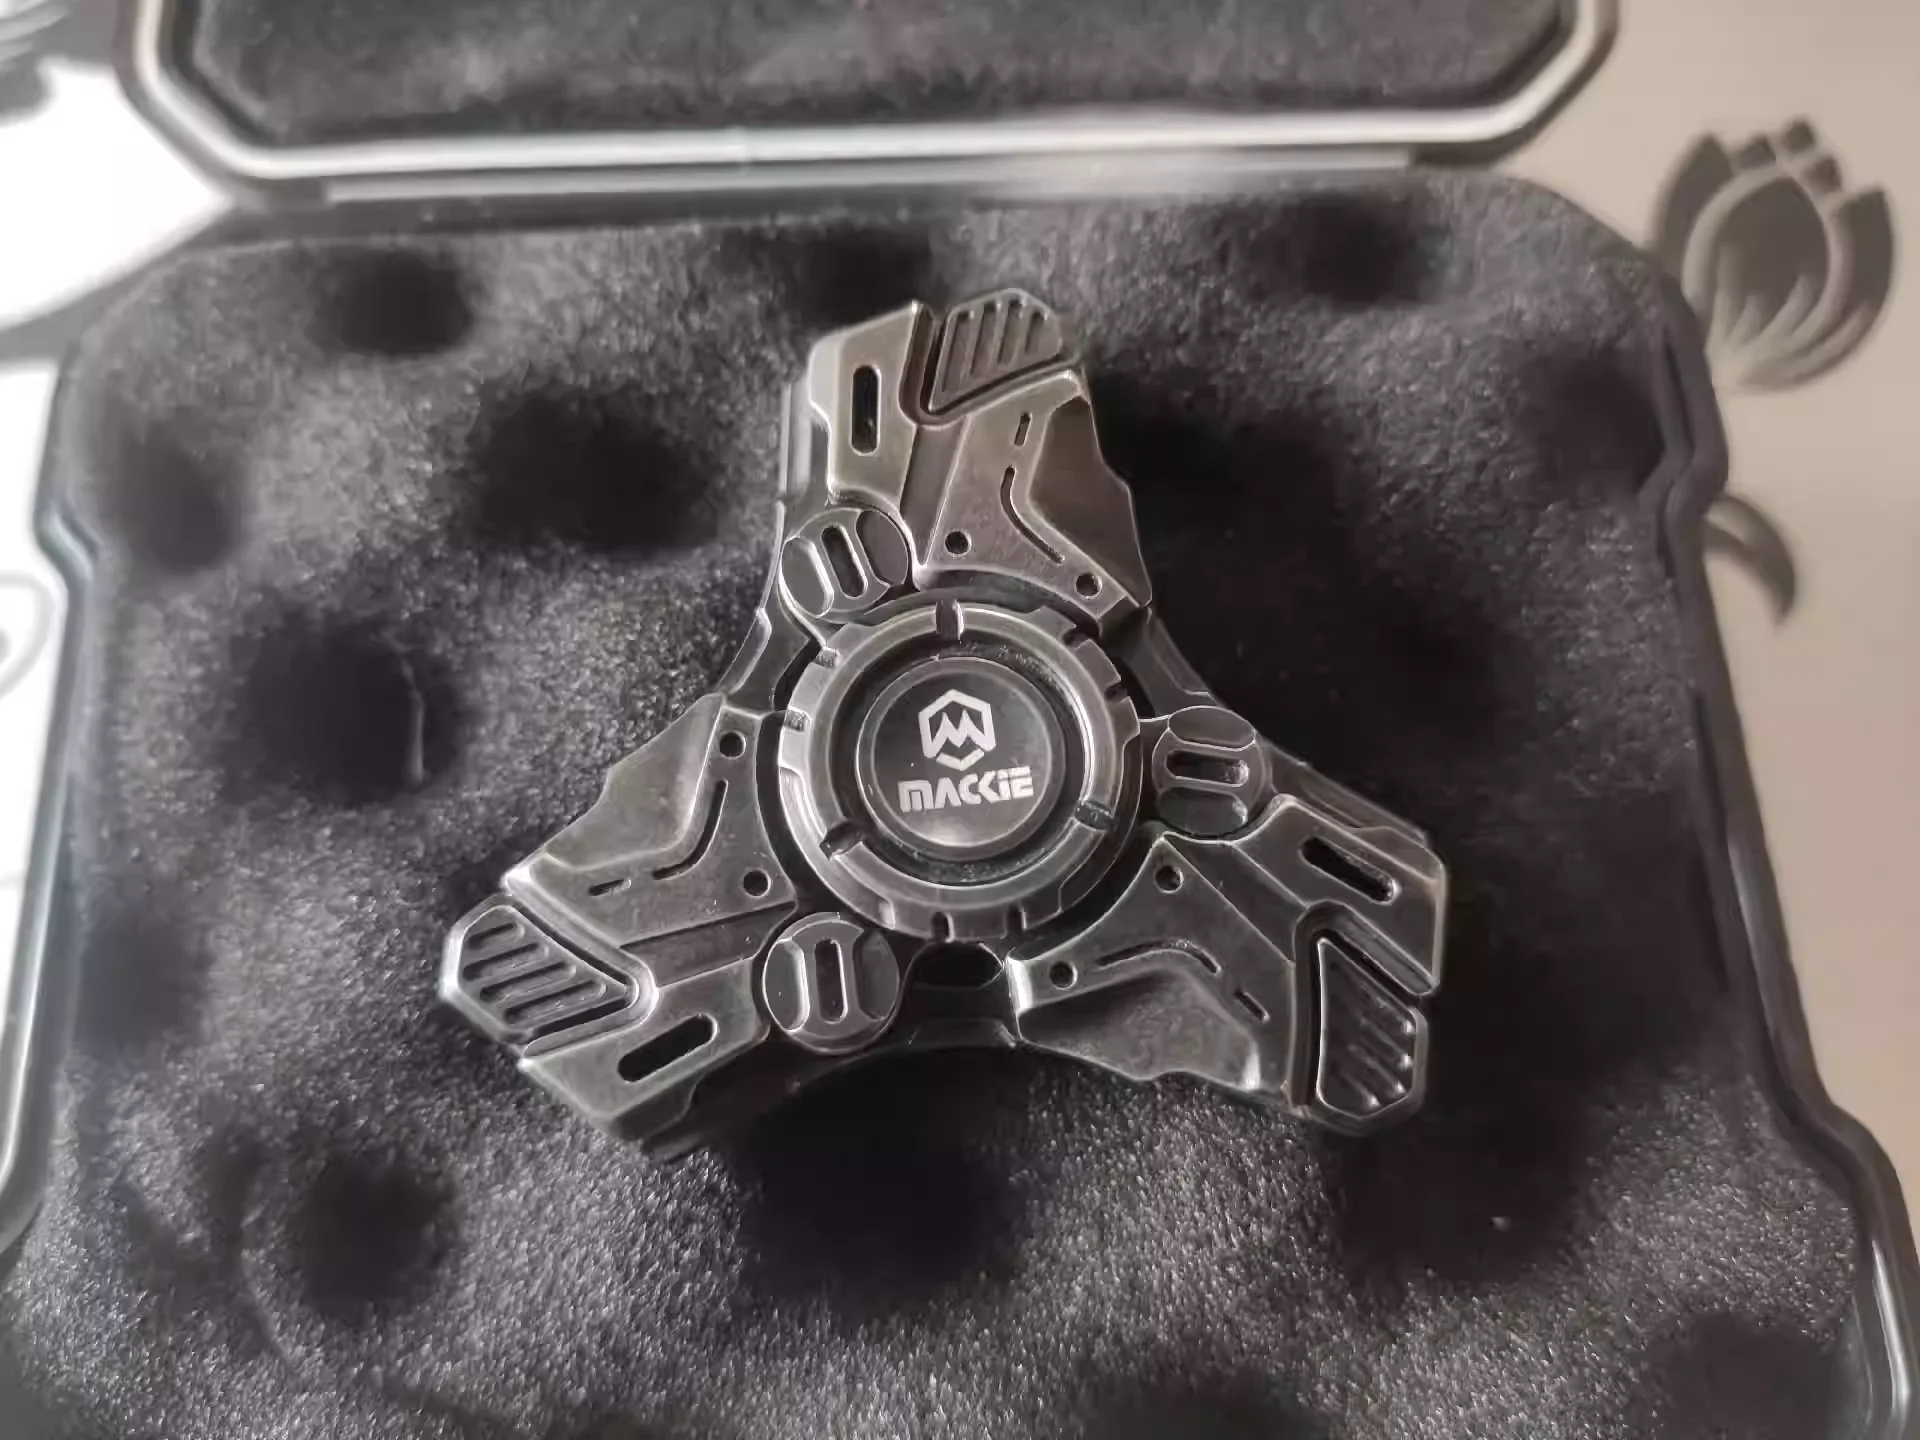 

MACKIE RX-03 armor opening gyroscope, made of old stainless steel